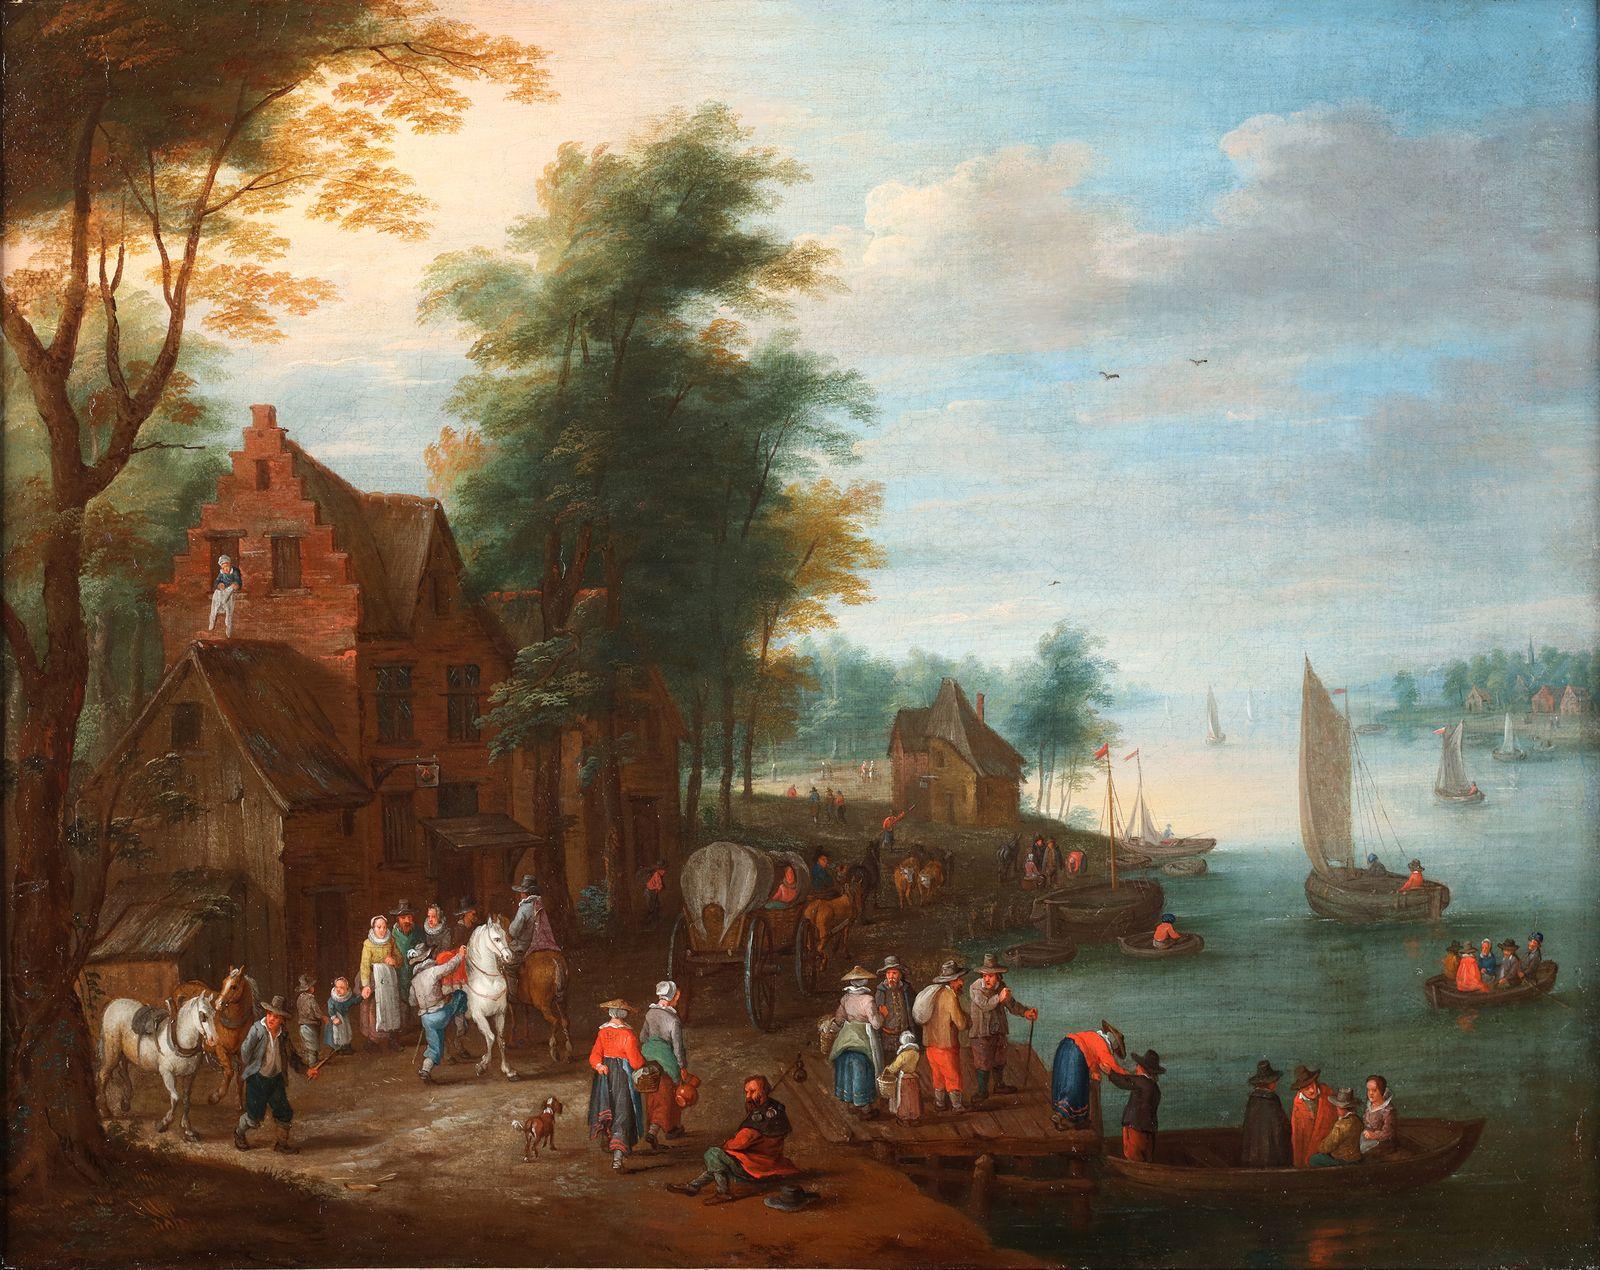 An animated village near the river - Painting by Jan-Frans Beschey